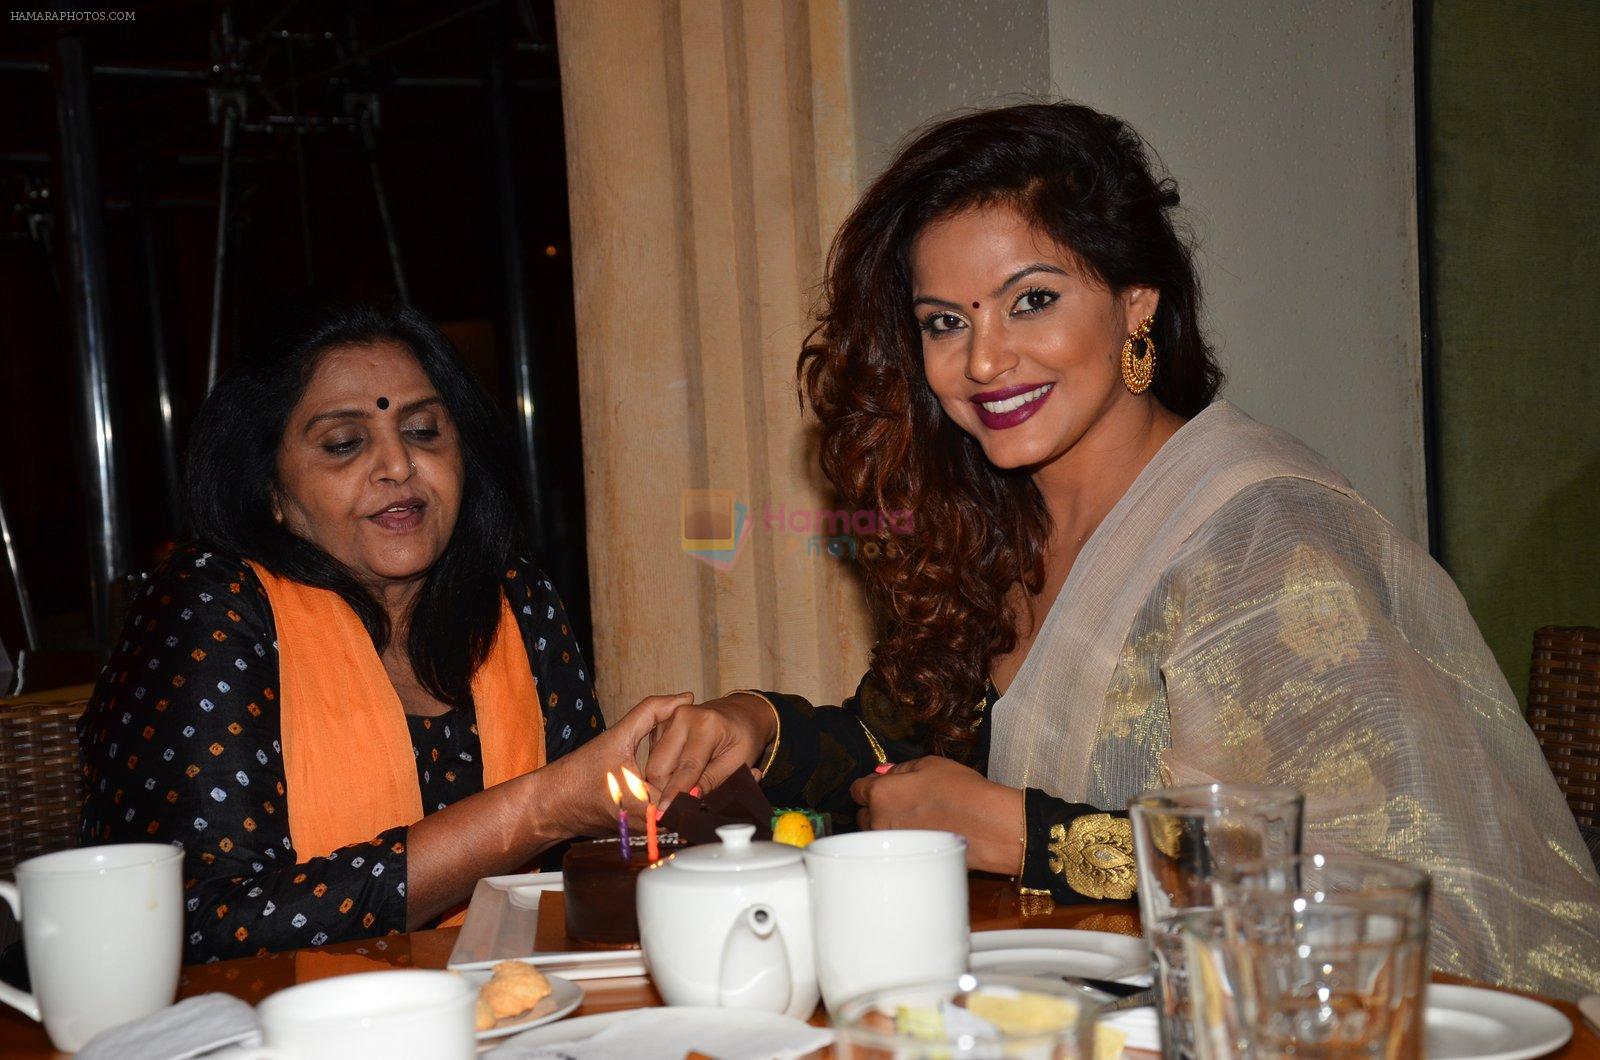 Neetu Chandra bday with her family on 20th June 2016